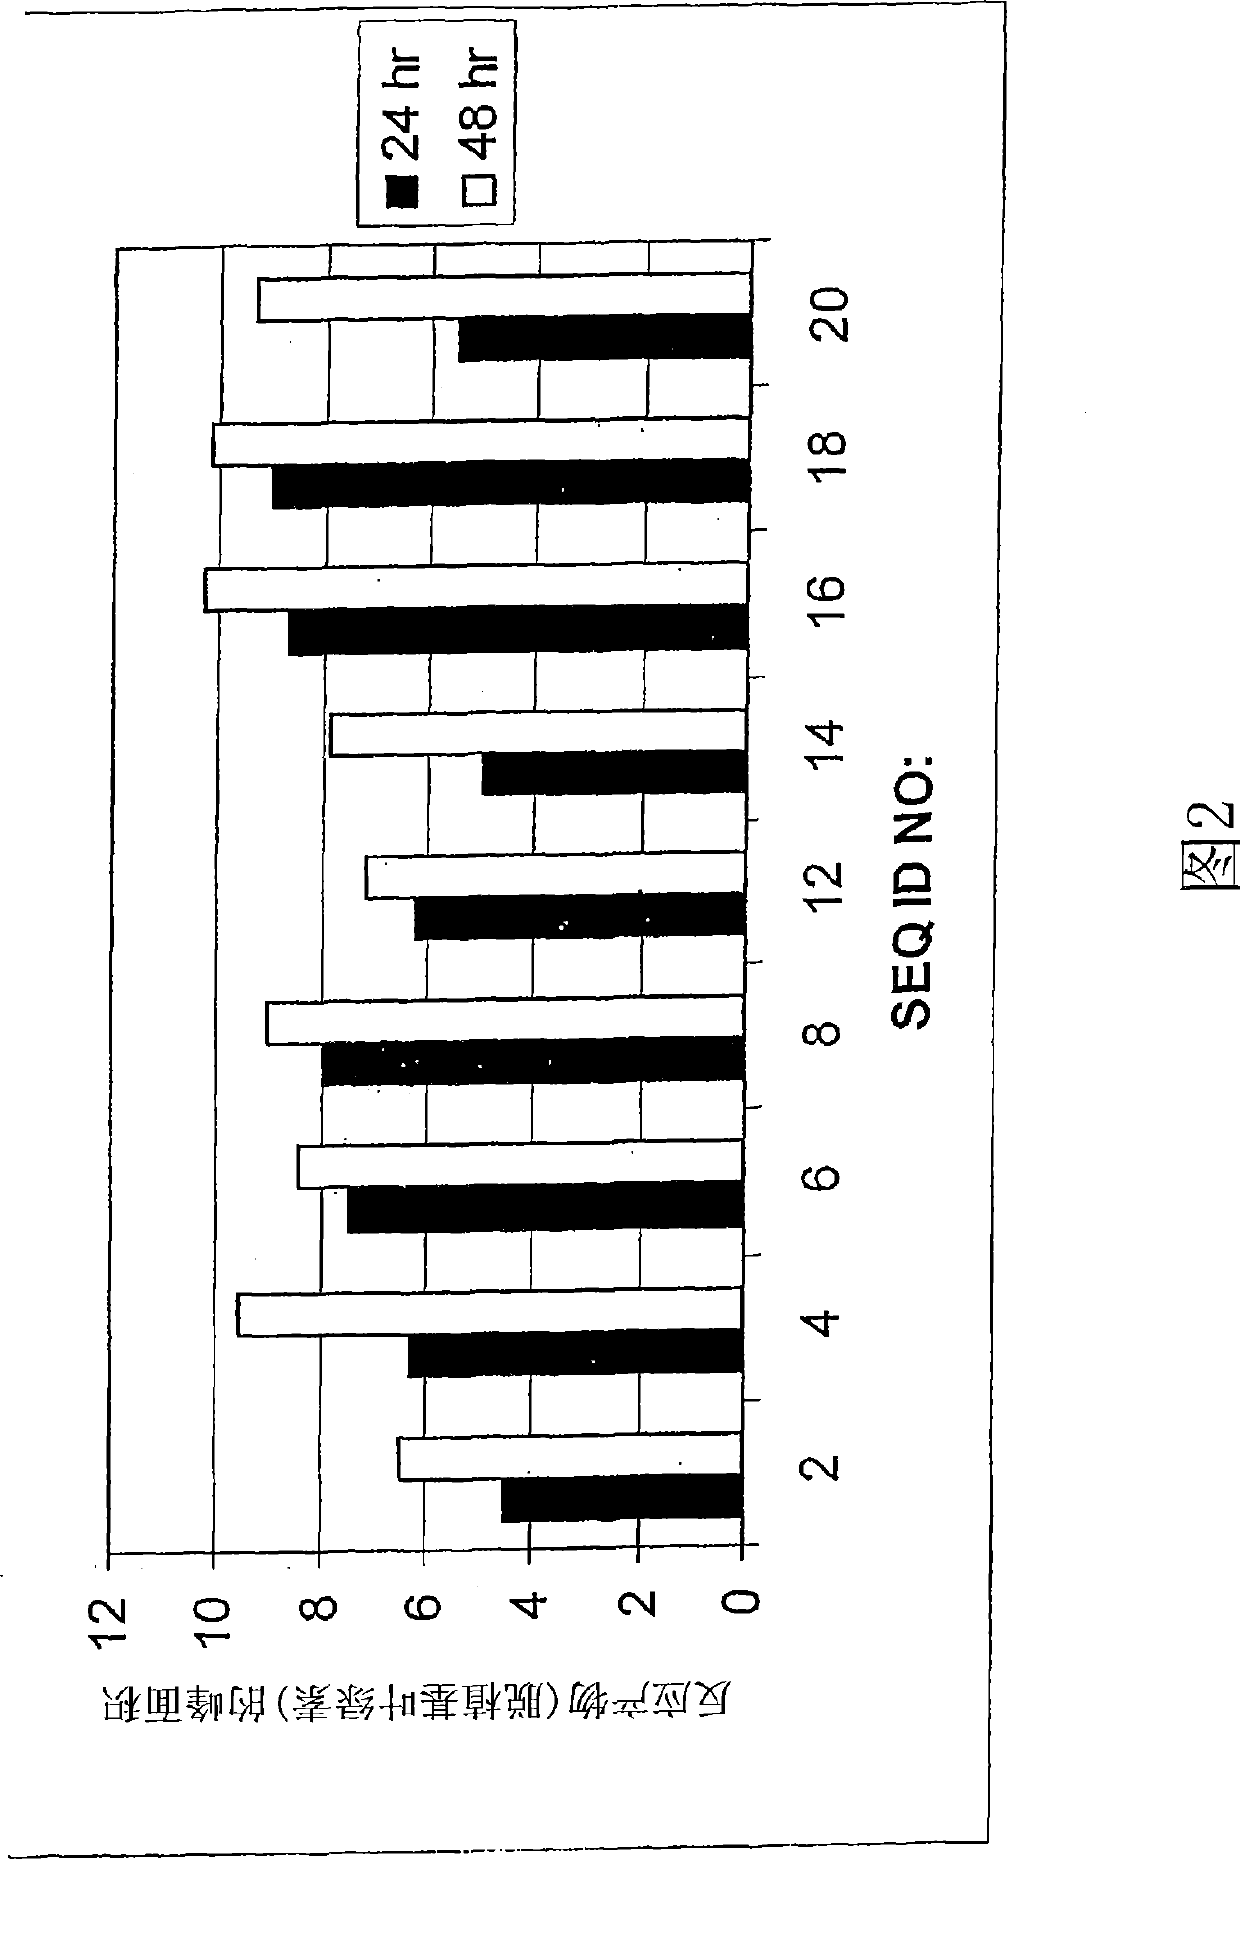 Compositions and methods for enzymatic decolorization of chlorophyll